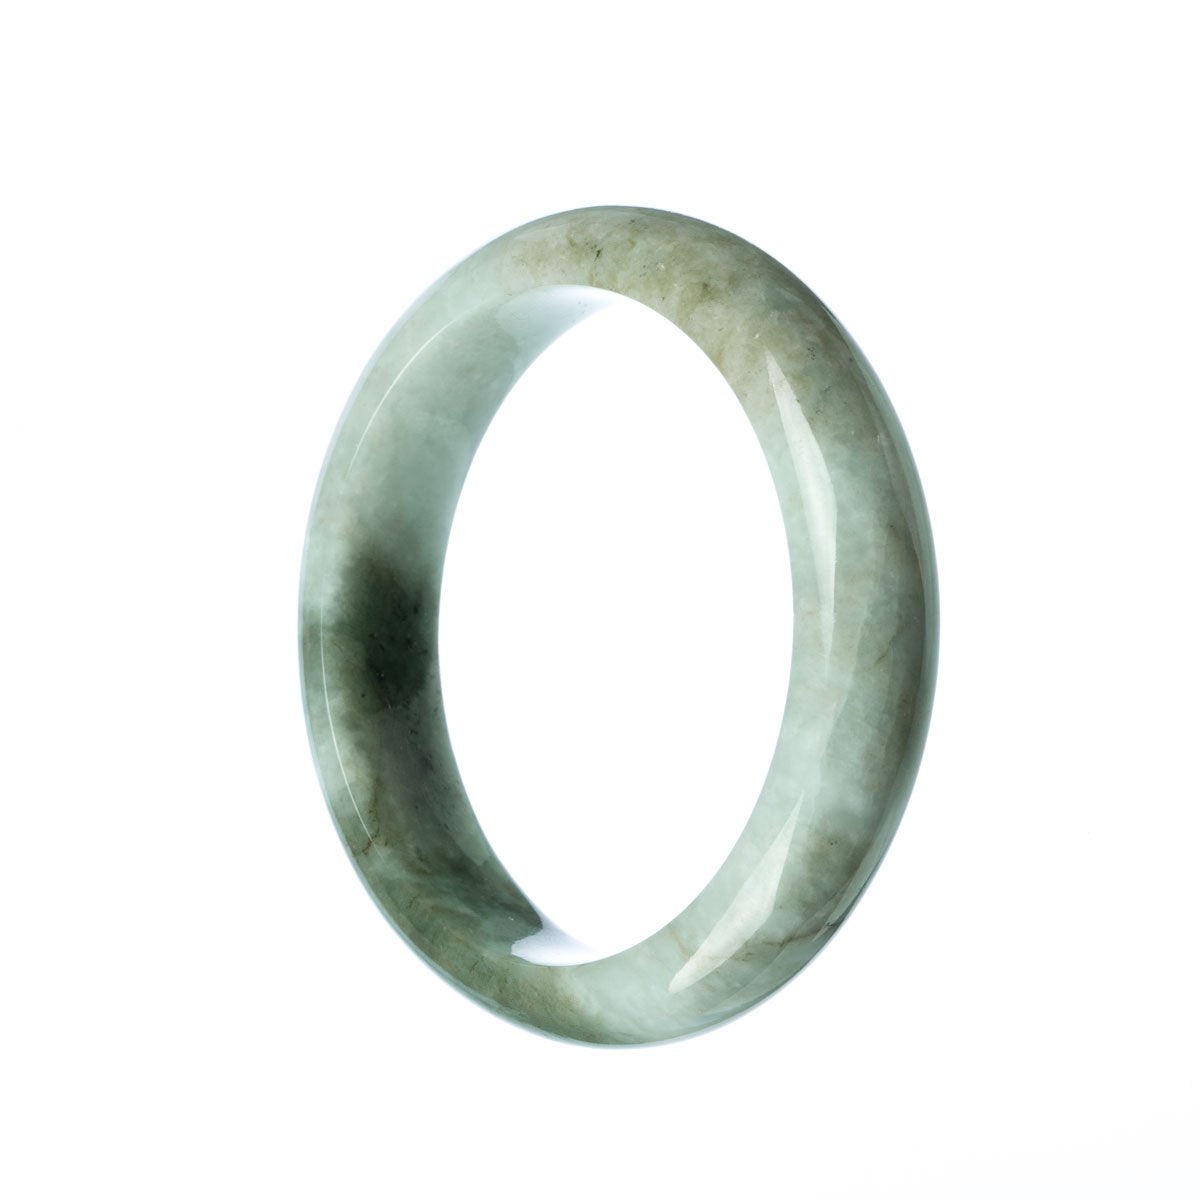 A half moon shaped, genuine Type A white and green traditional jade bracelet with a 59mm diameter, sold by MAYS.